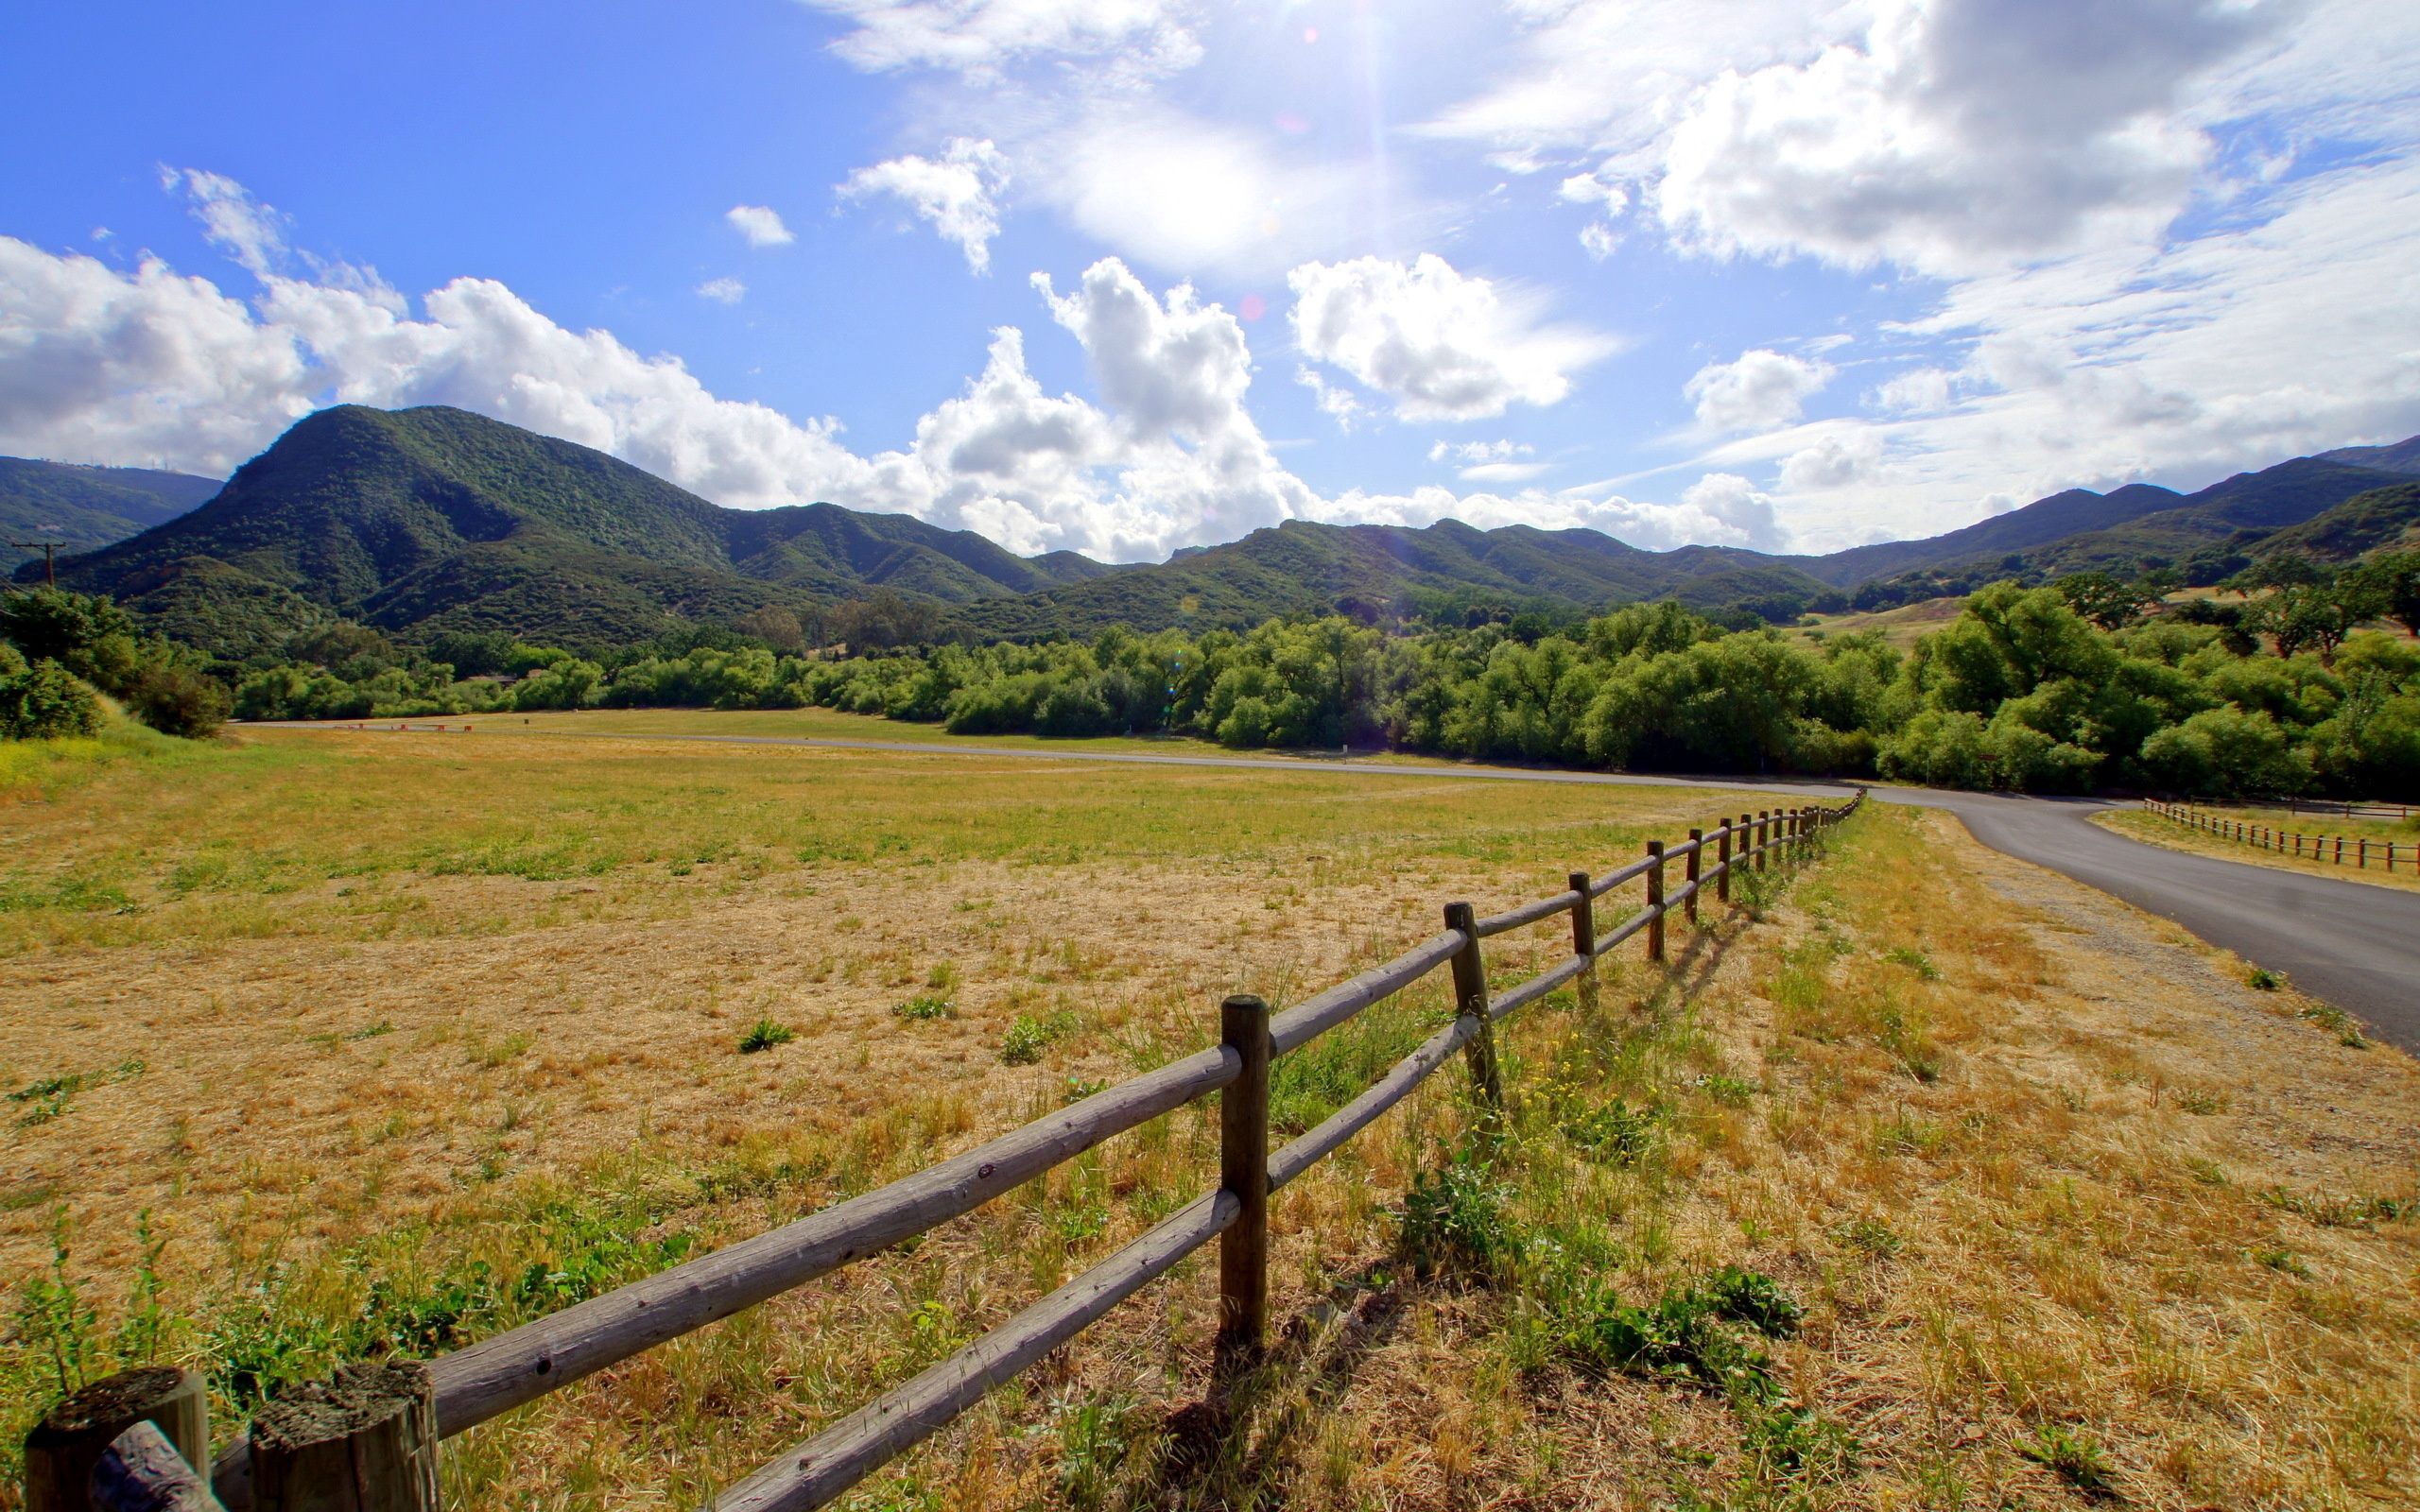 noon, clouds, nature, mountains, sun, shine, light, road, fencing, enclosure